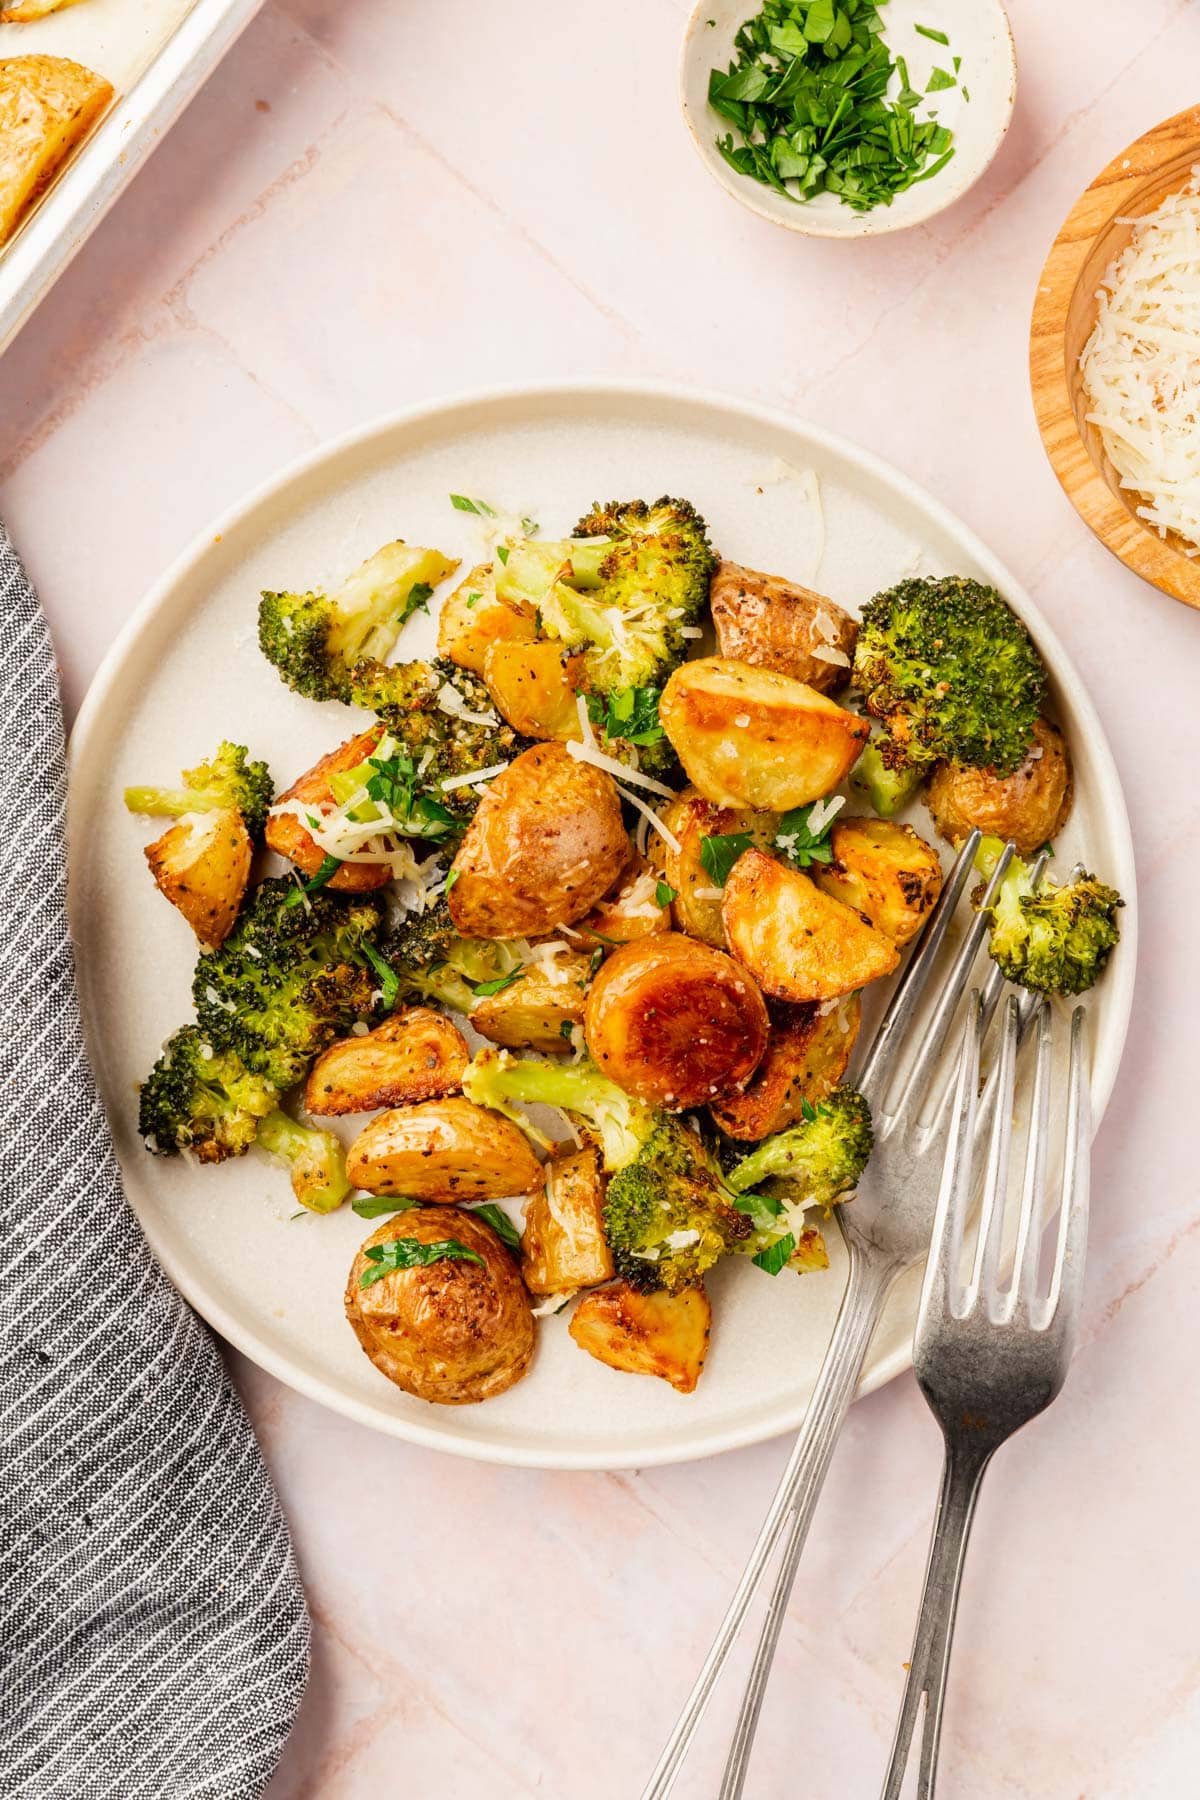 A plate filled with roasted baby potatoes and broccoli with two forks and a side of parmesan cheese and chopped parsley.